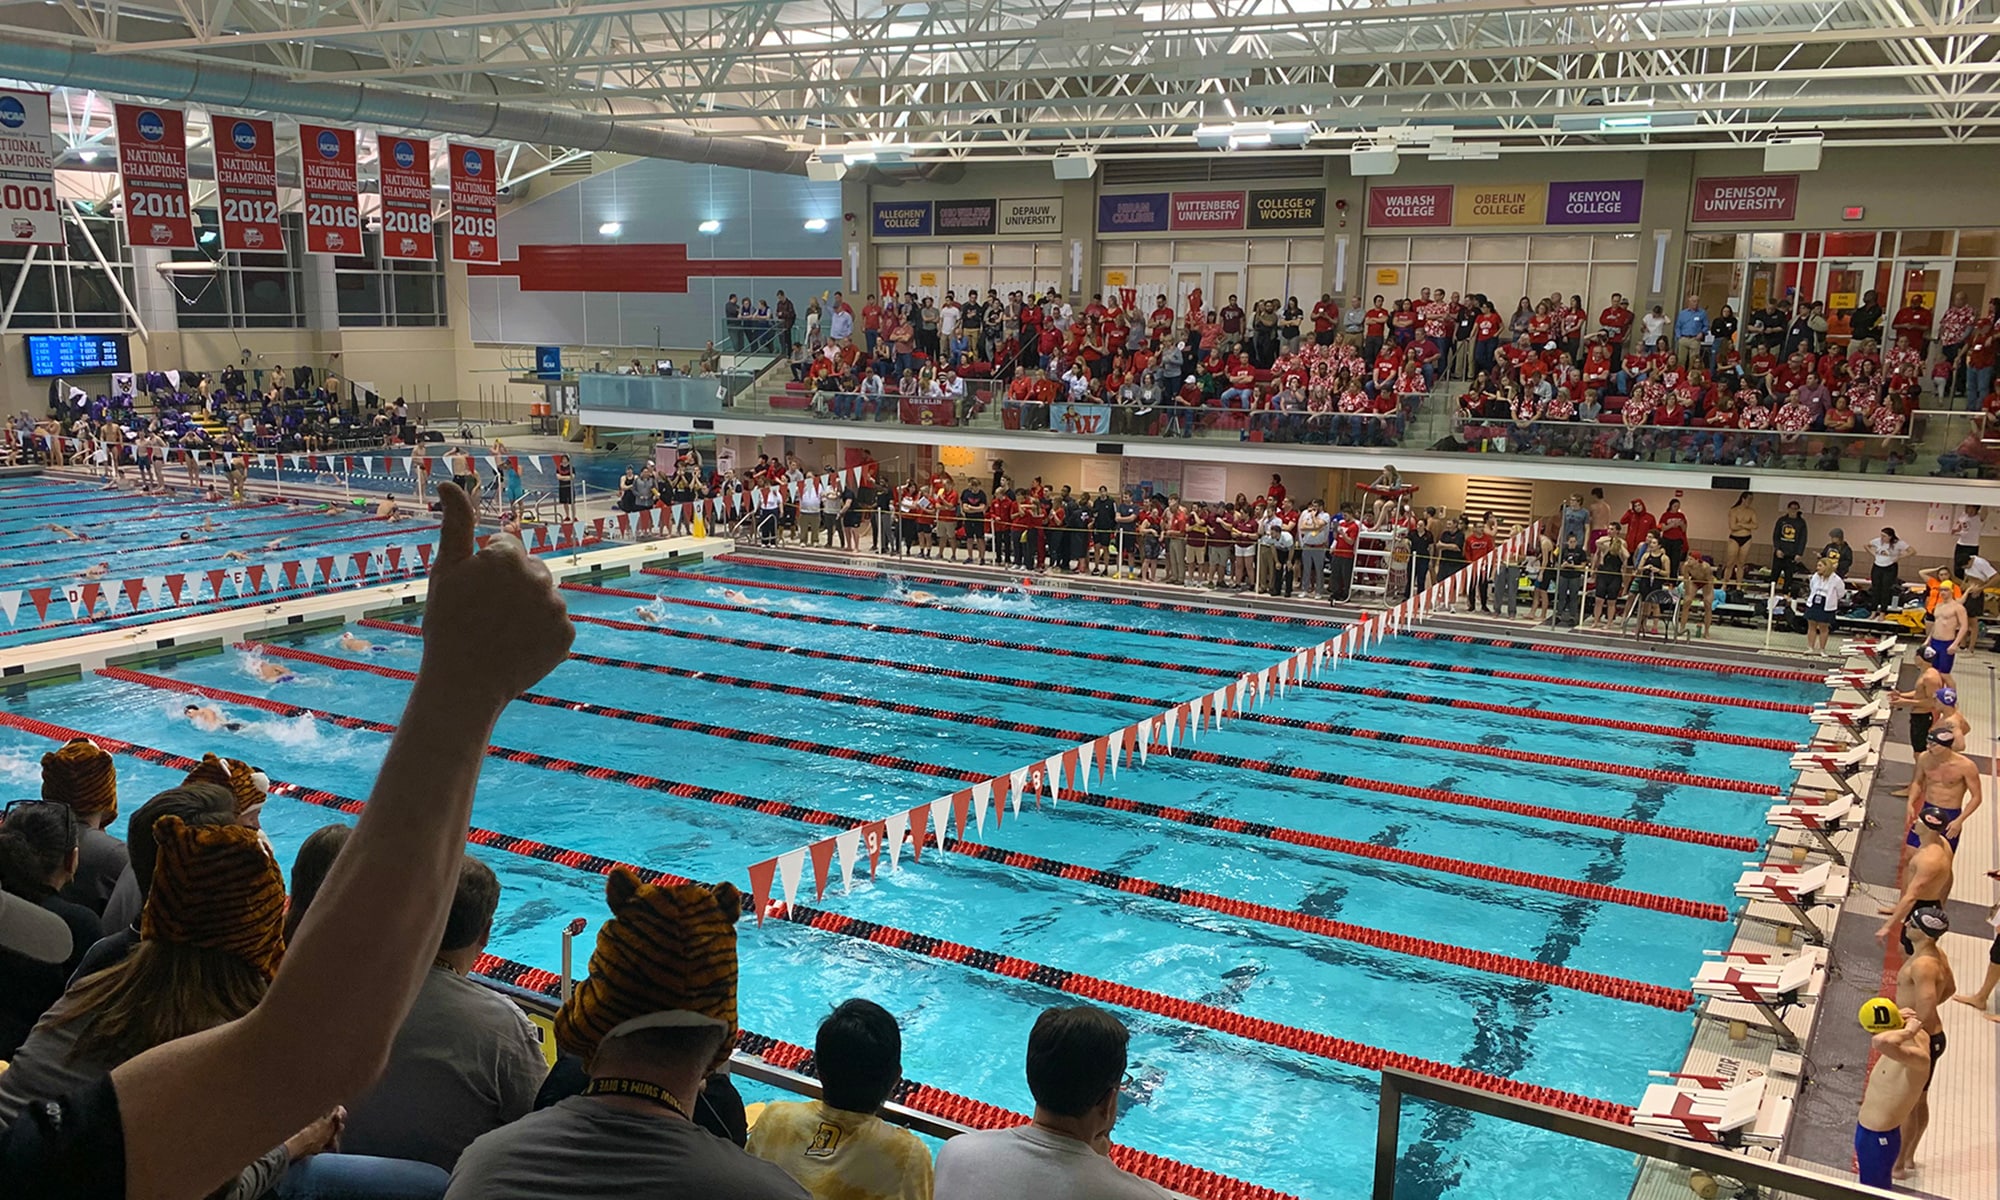 Once a program that contended for national titles, but fell agonizingly short, Denison has hung six NCAA championship banners, five for the men, one for the women, in the rafters of the Trumbull Aquatic Center. Photo Credit: Craig Hicks/Denison University